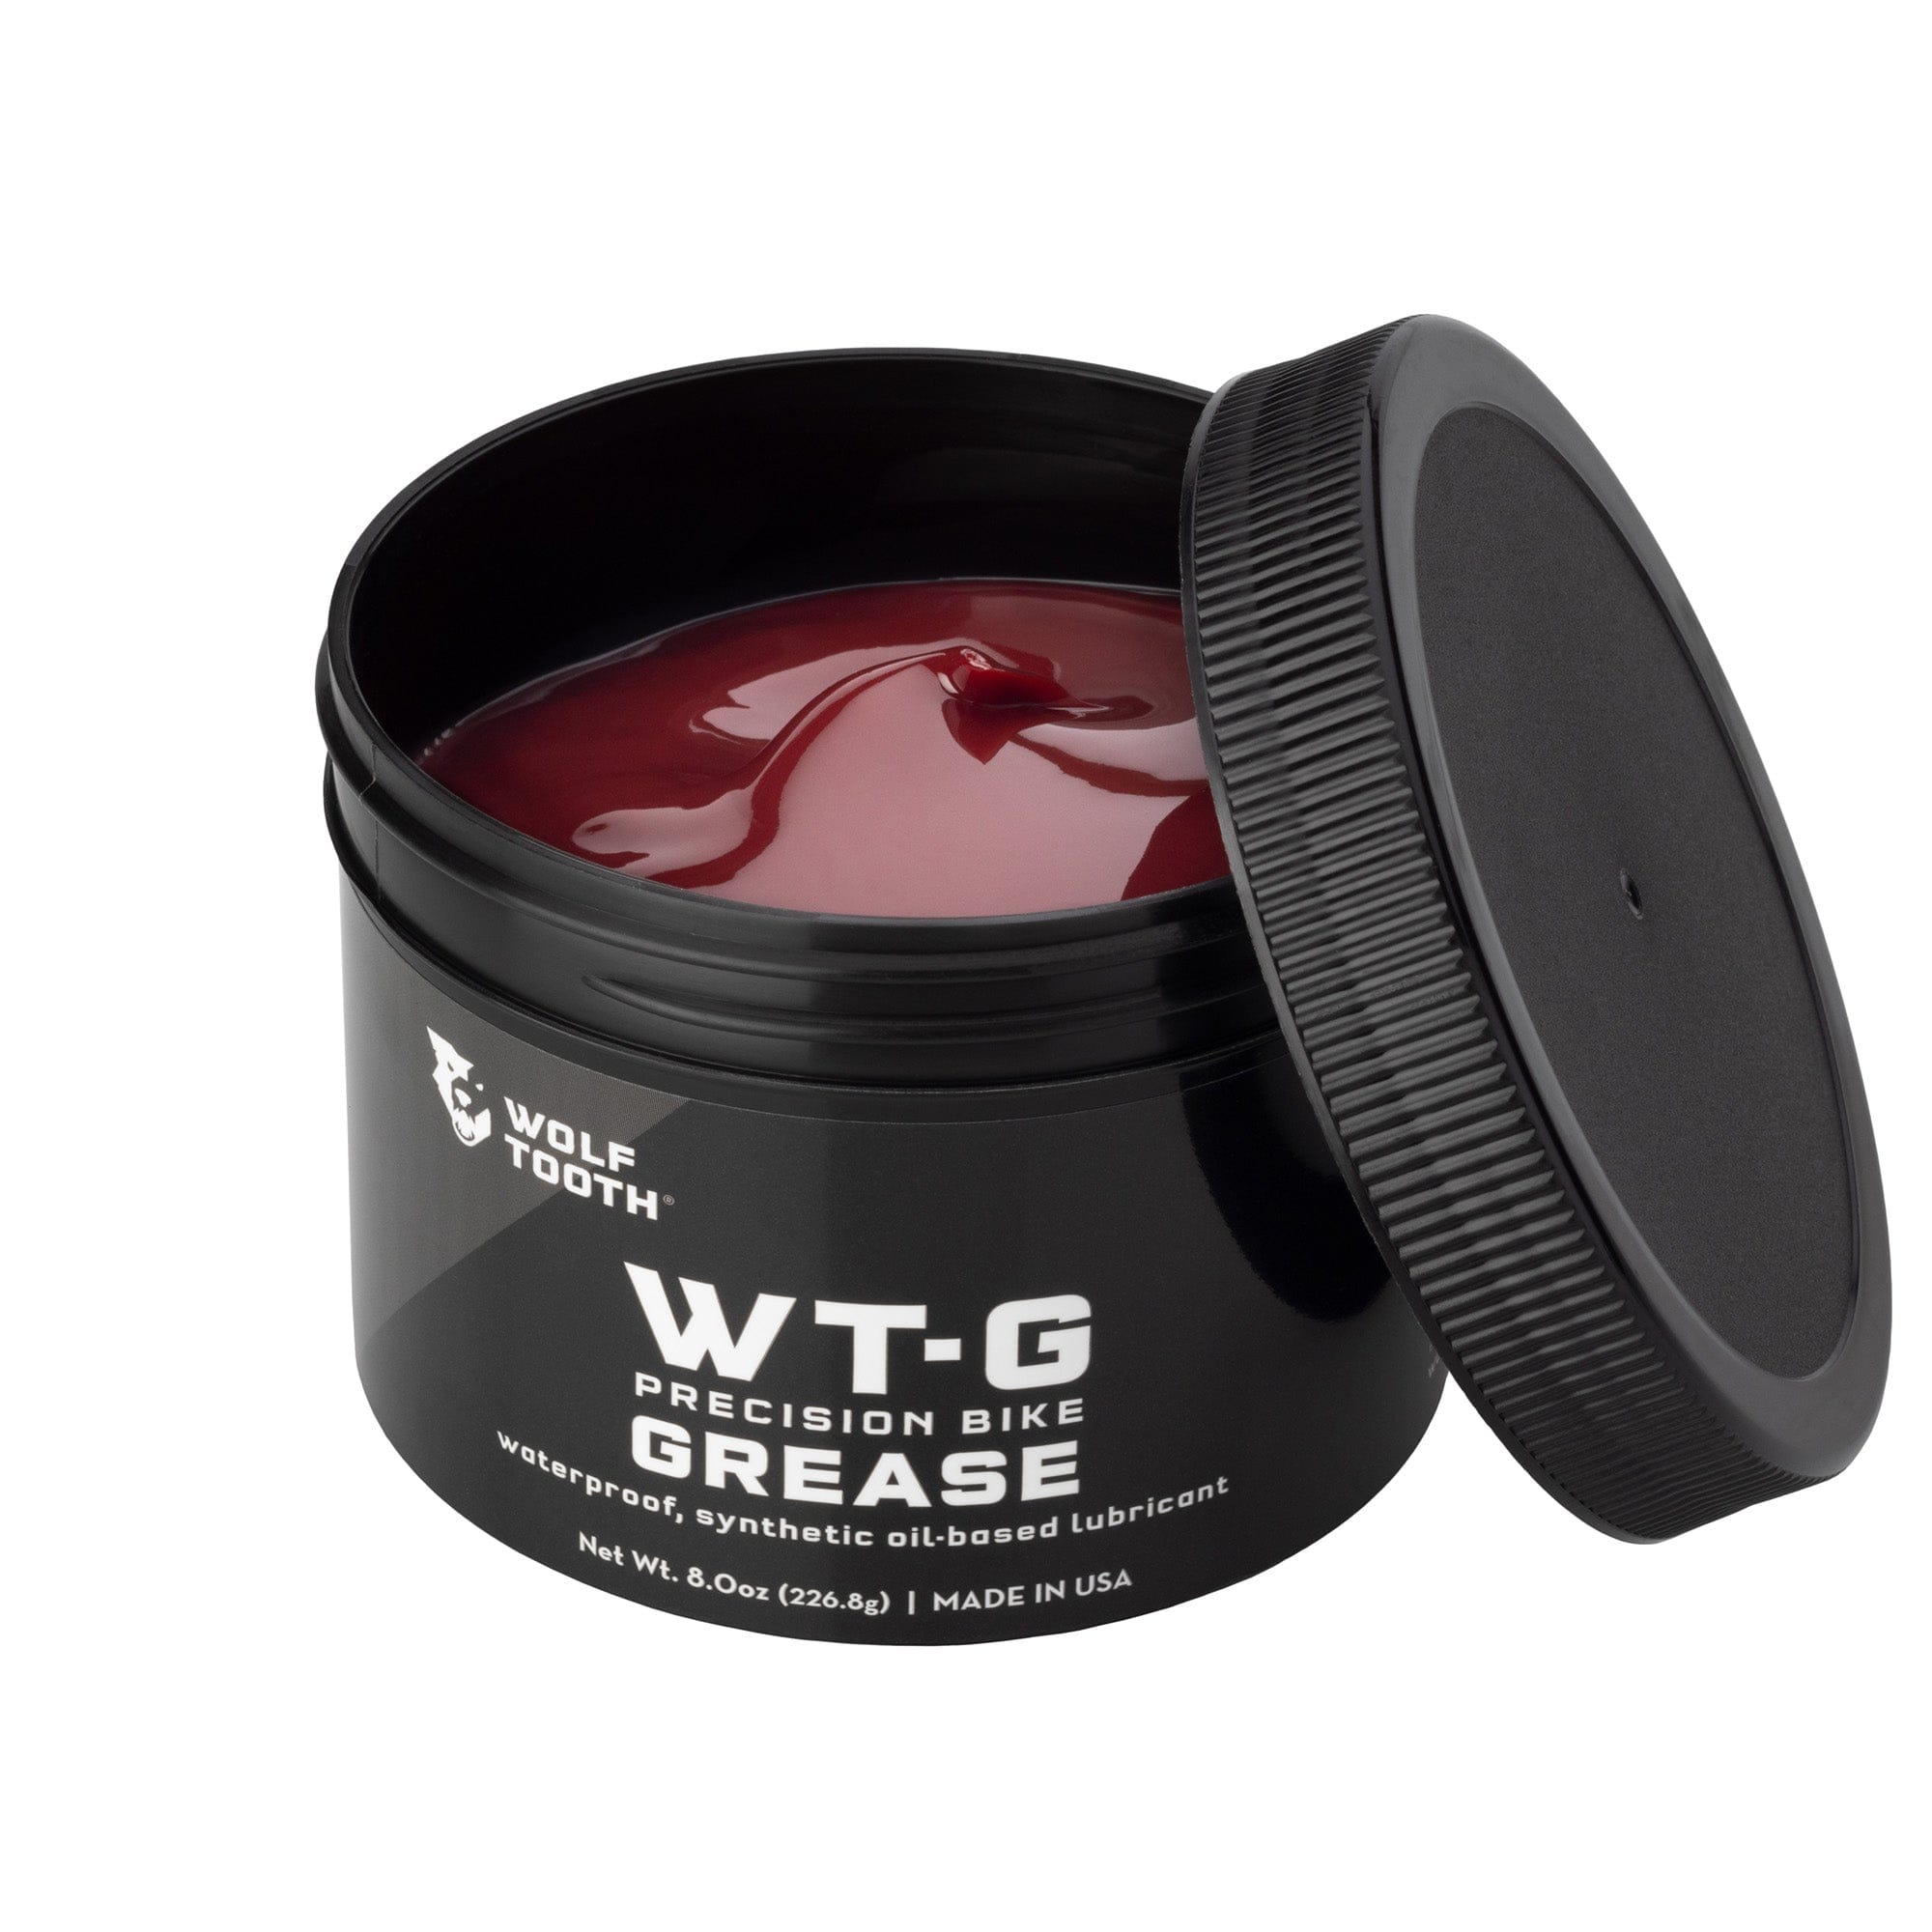 WT-G Precision Bike Grease – Wolf Tooth Components